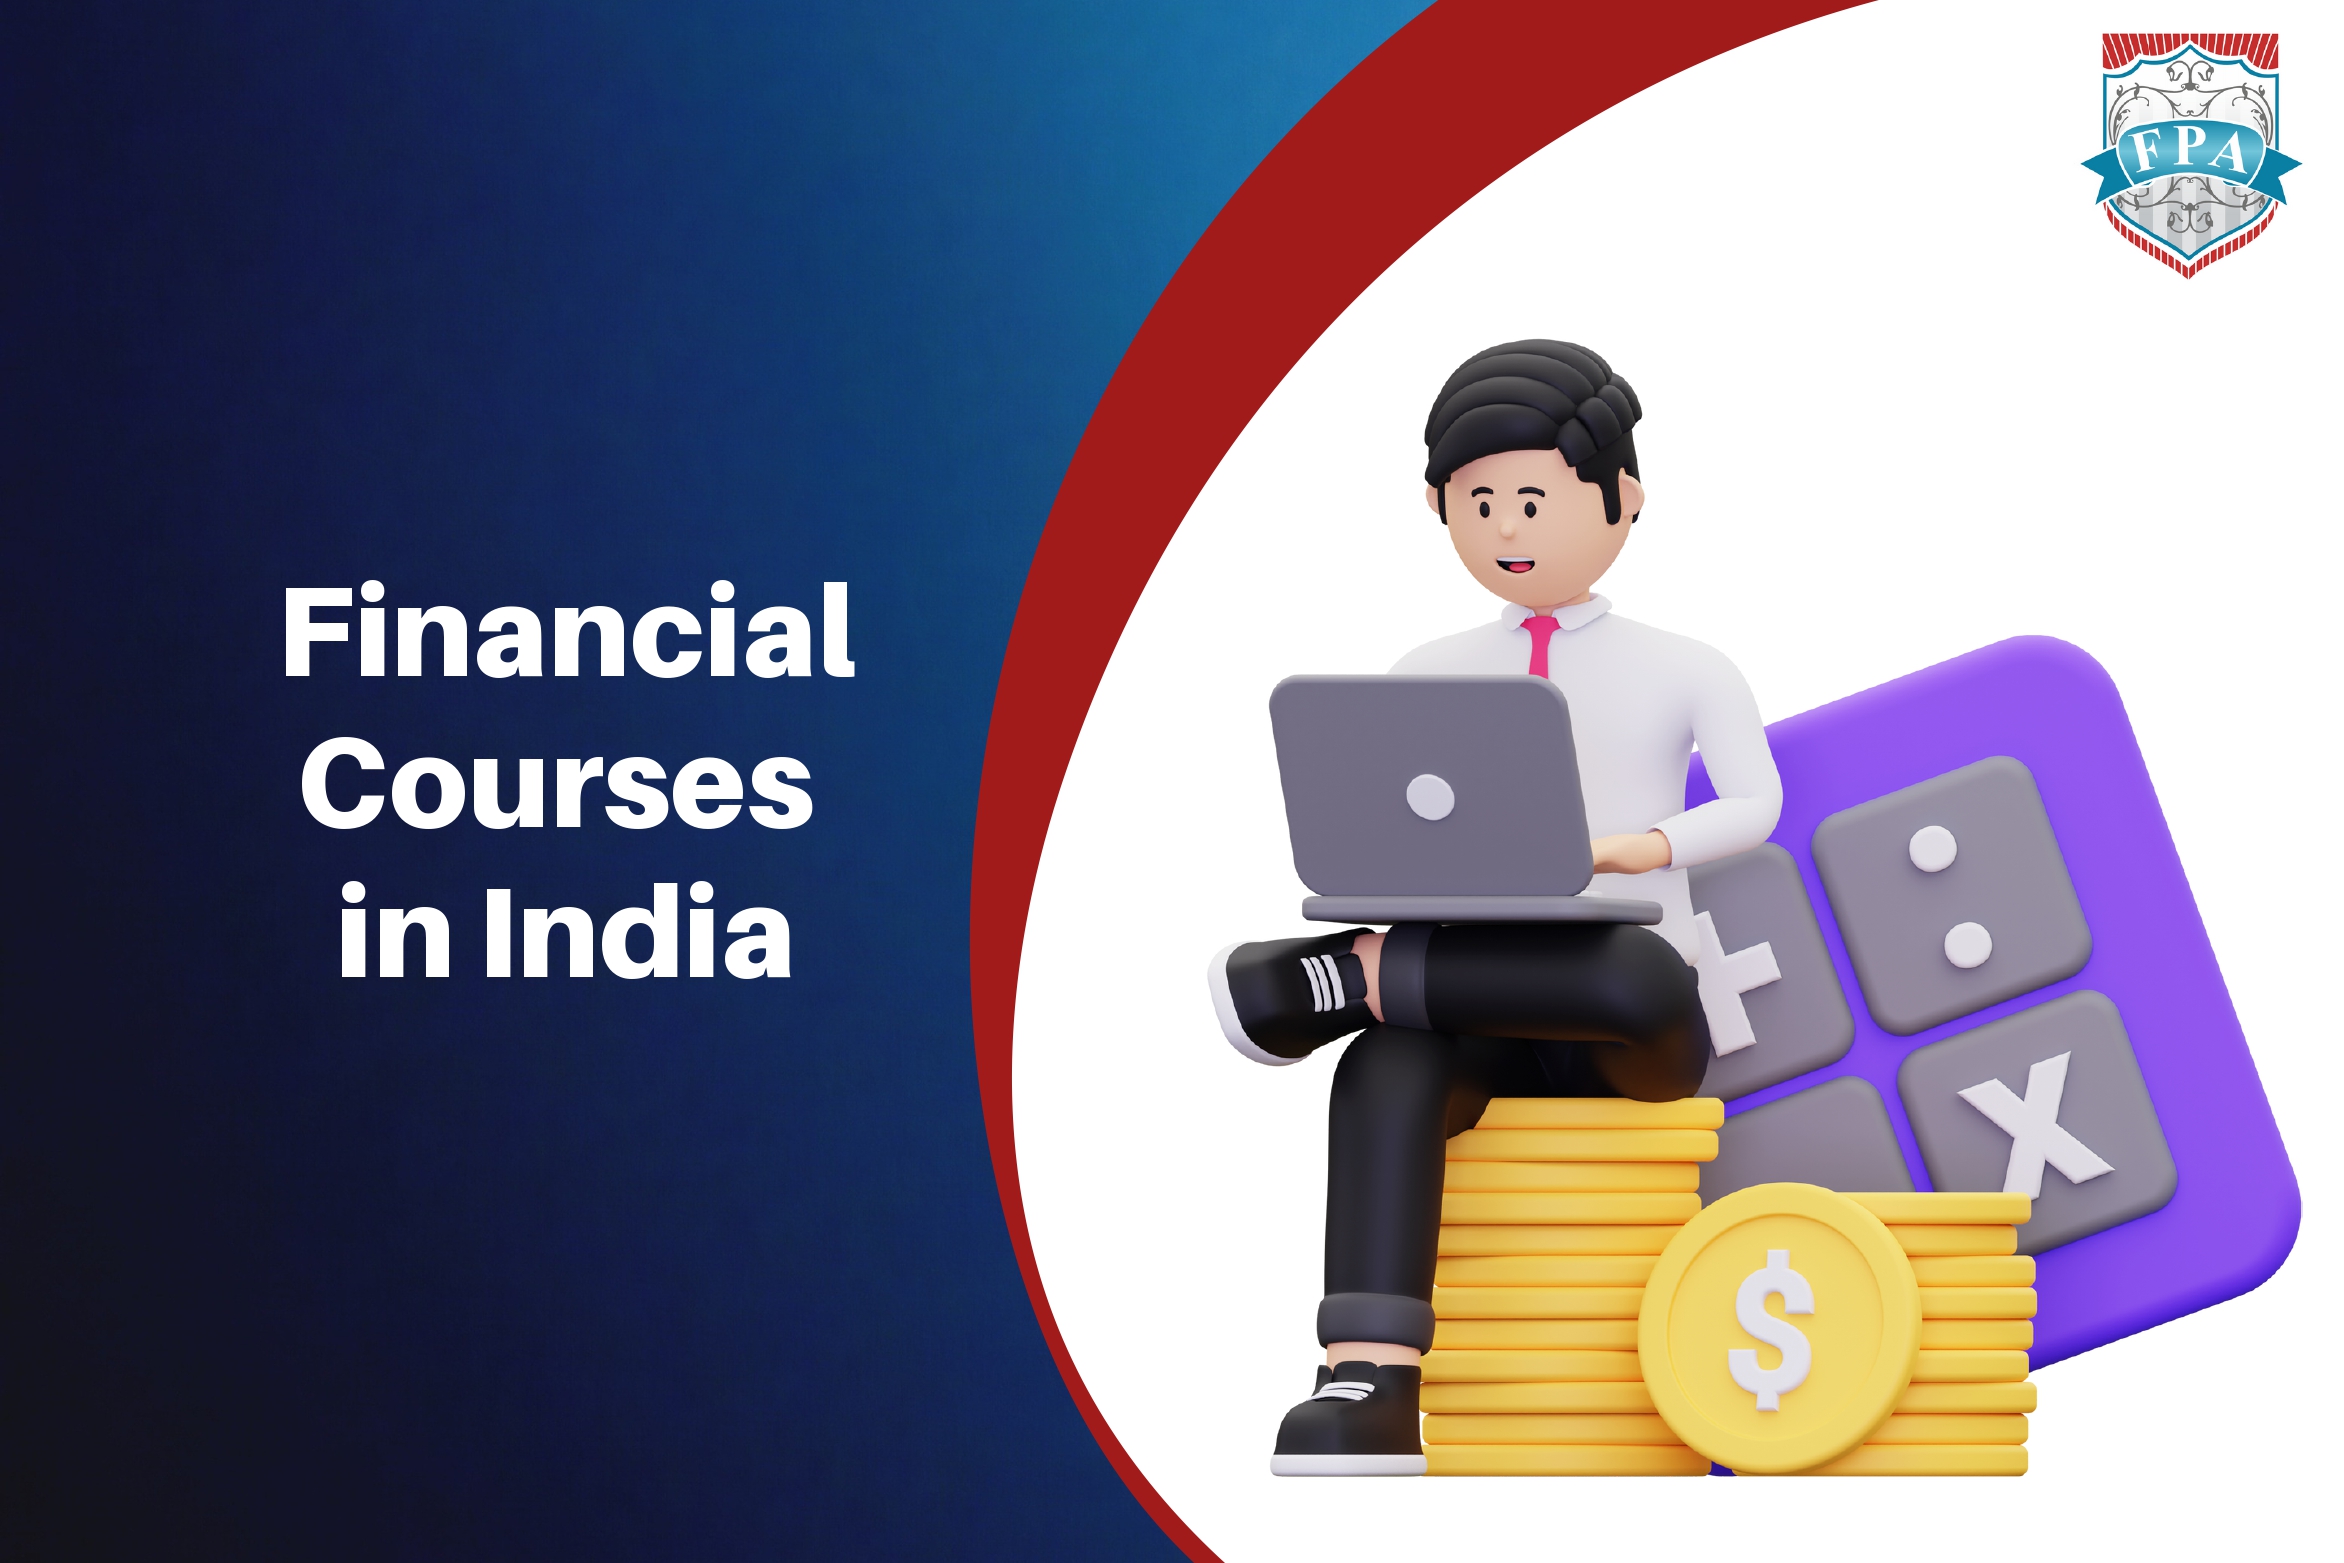 Financial courses in India